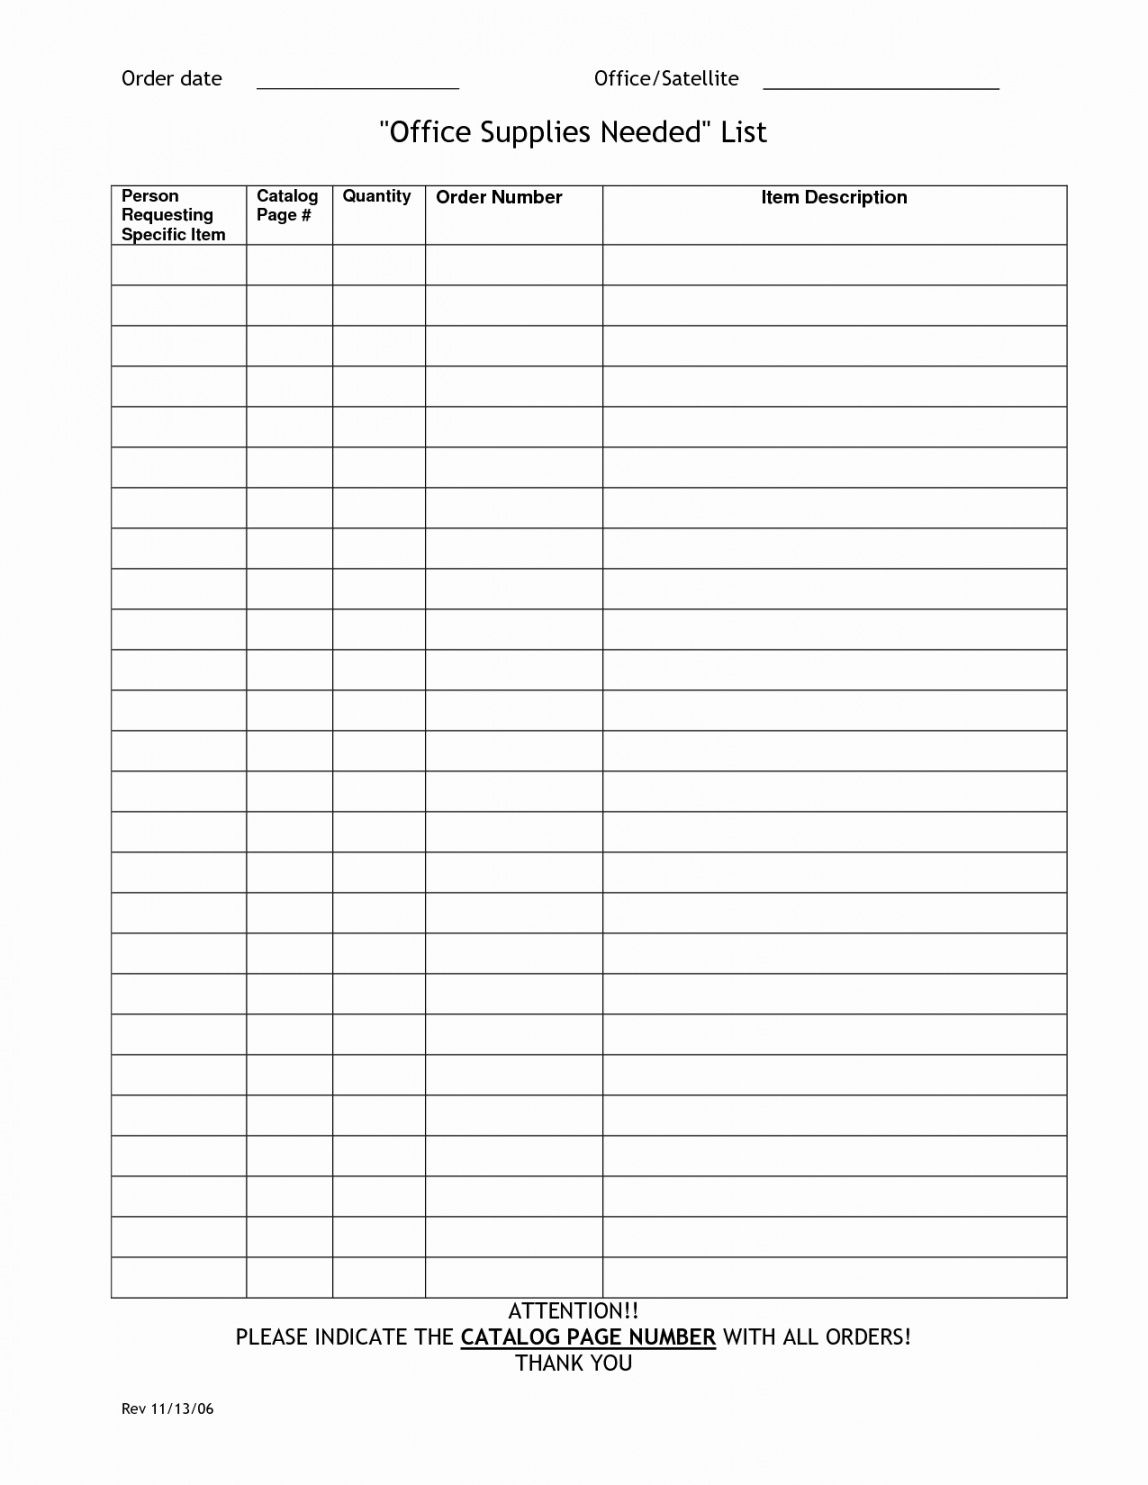 editable medical supply inventory spreadsheet elegant supply inventory inside medical supply inventory template example